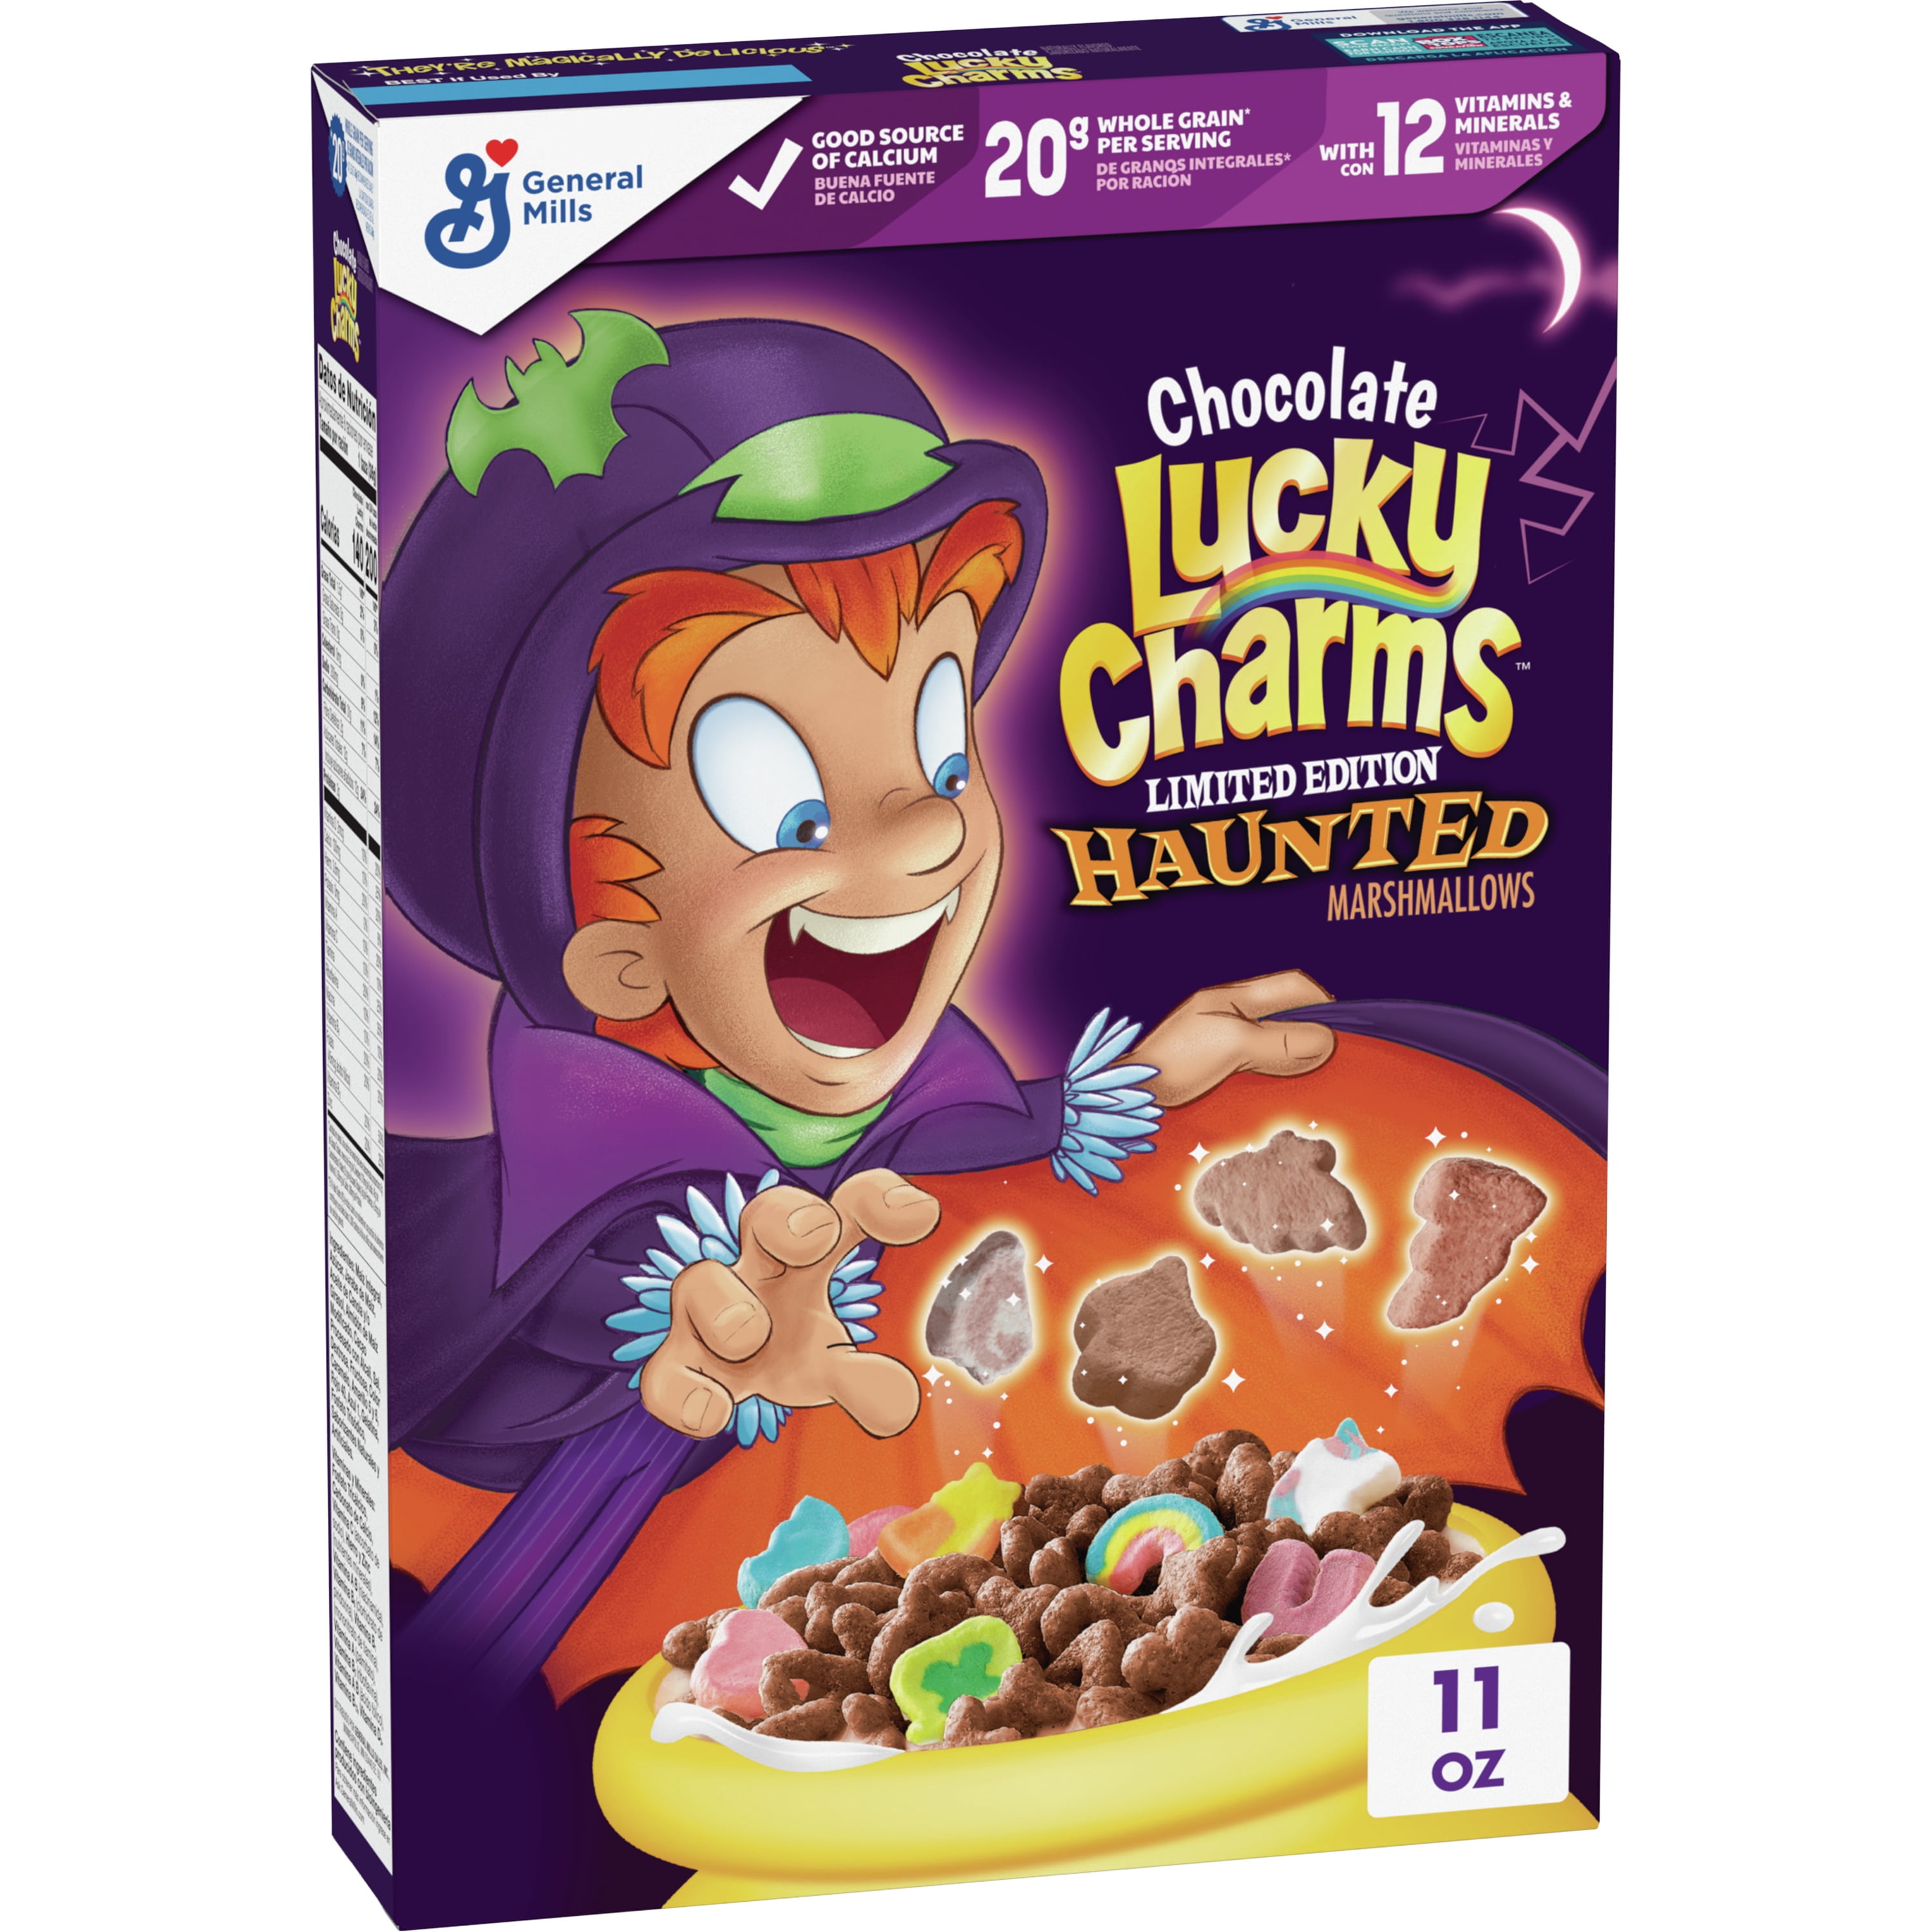 Chocolate Lucky Charms Cereal with Haunted Marshmallows, Halloween Edition,  11 oz